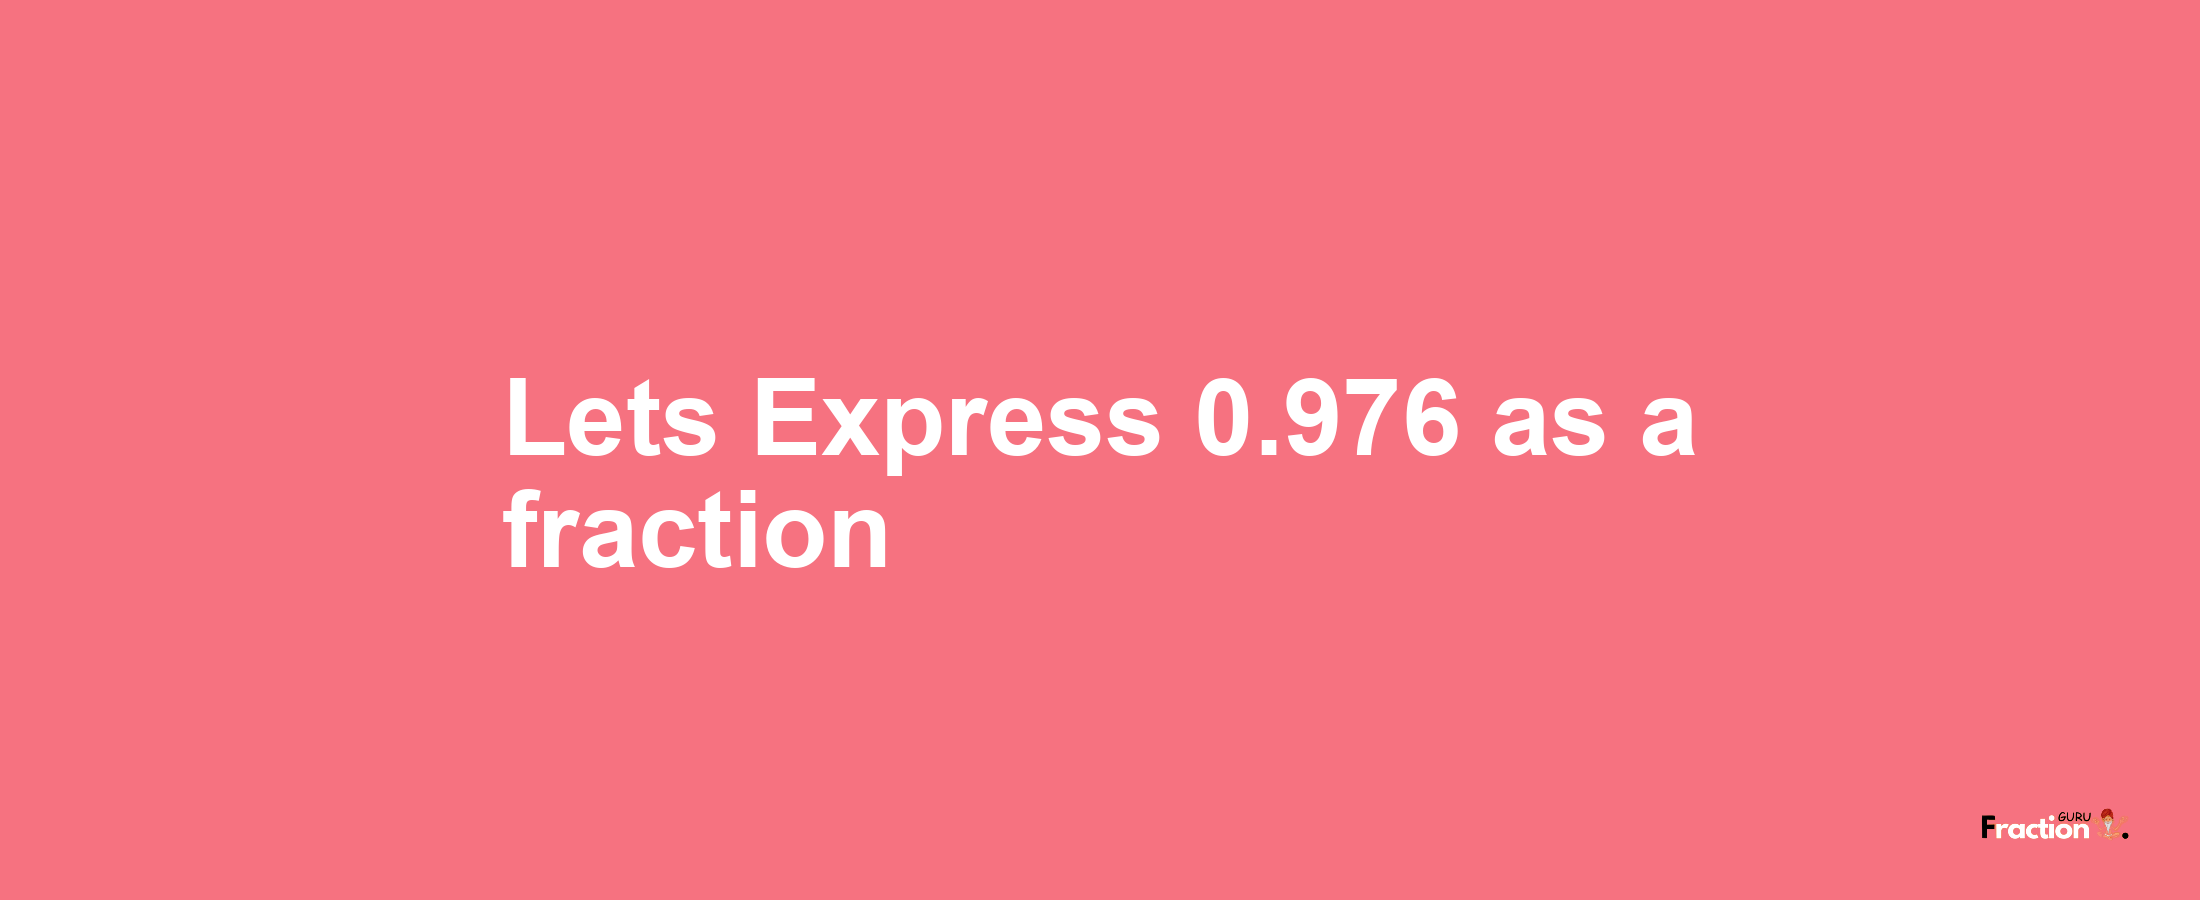 Lets Express 0.976 as afraction